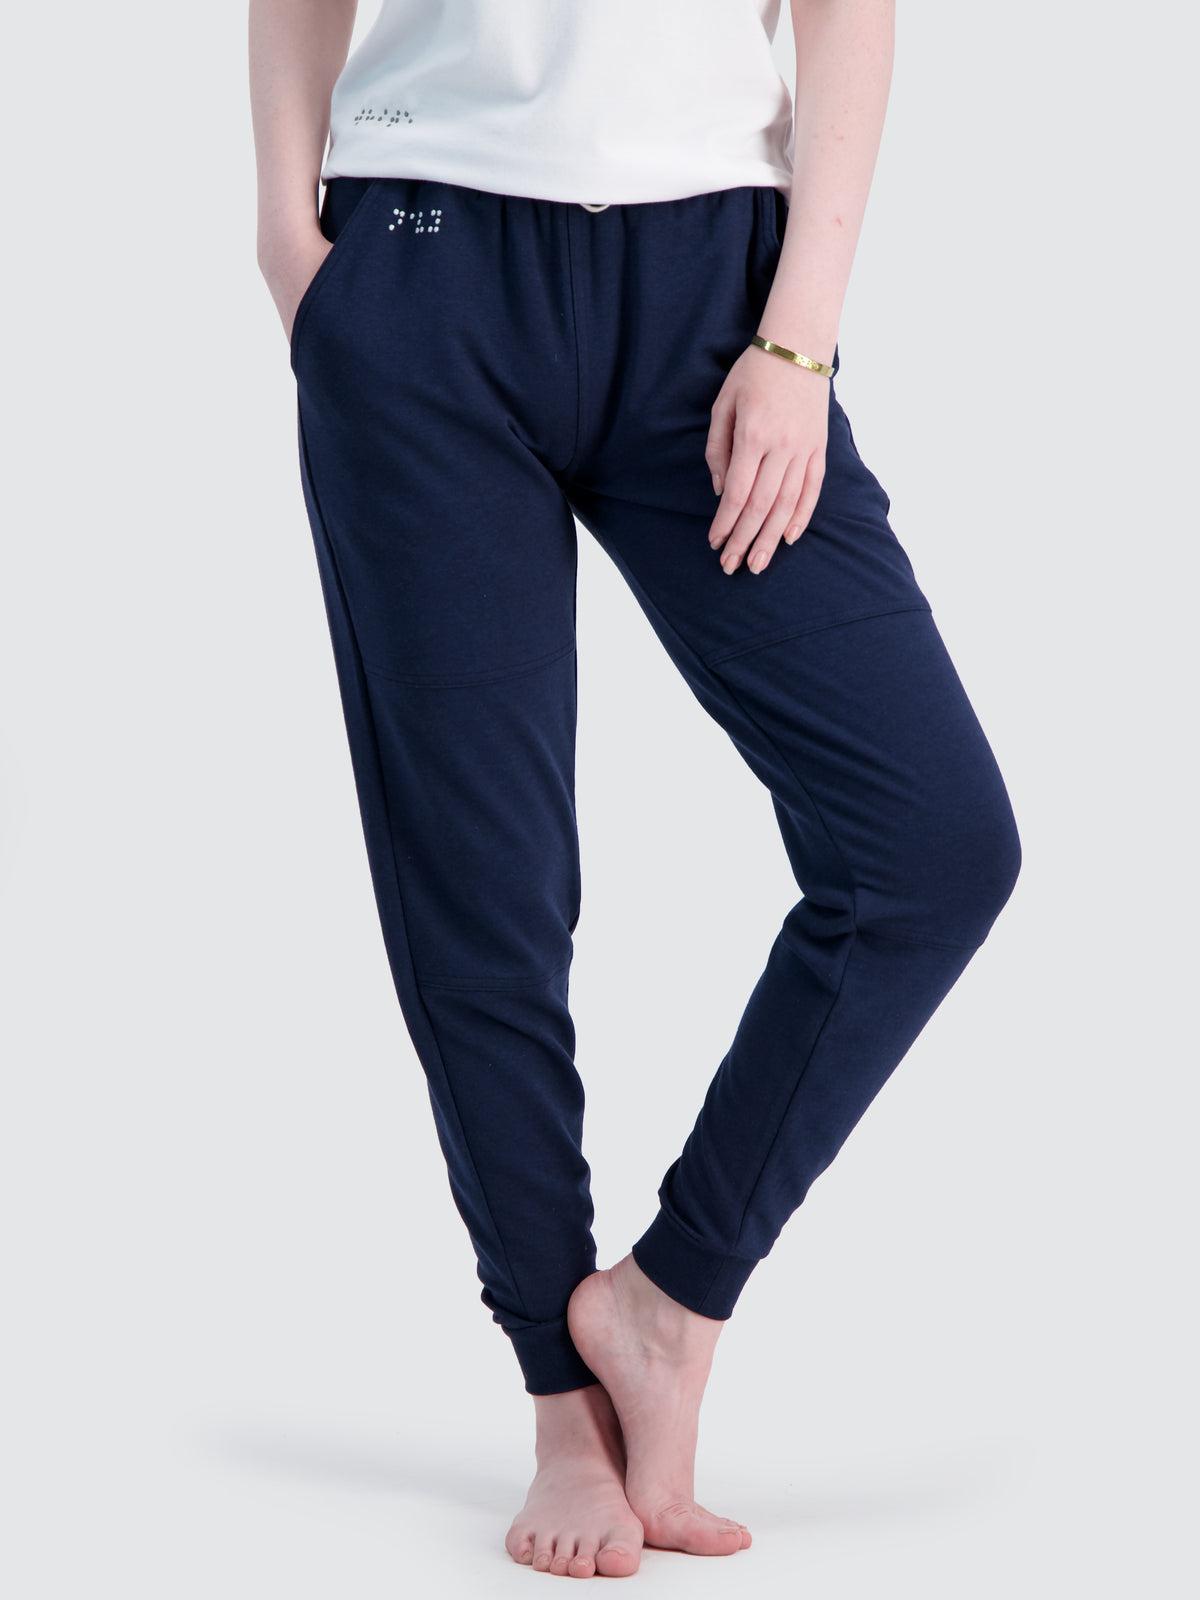 Two Blind Brothers - Womens Women's French Terry Jogger Navy